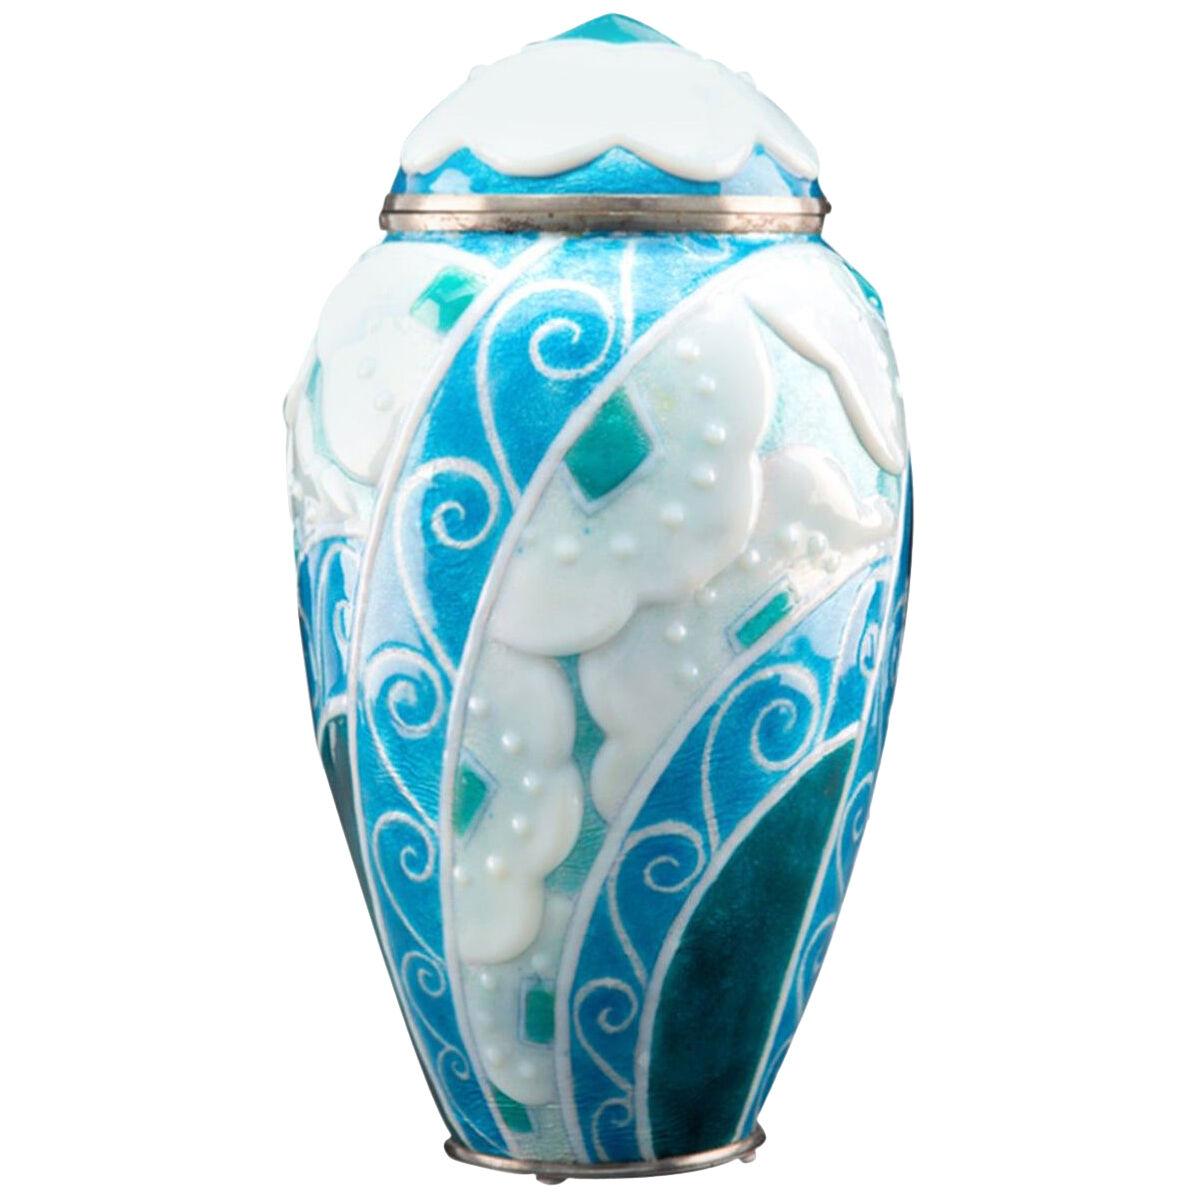 Limoges Art Deco Enameled Vase by Mauricette Pinoteau